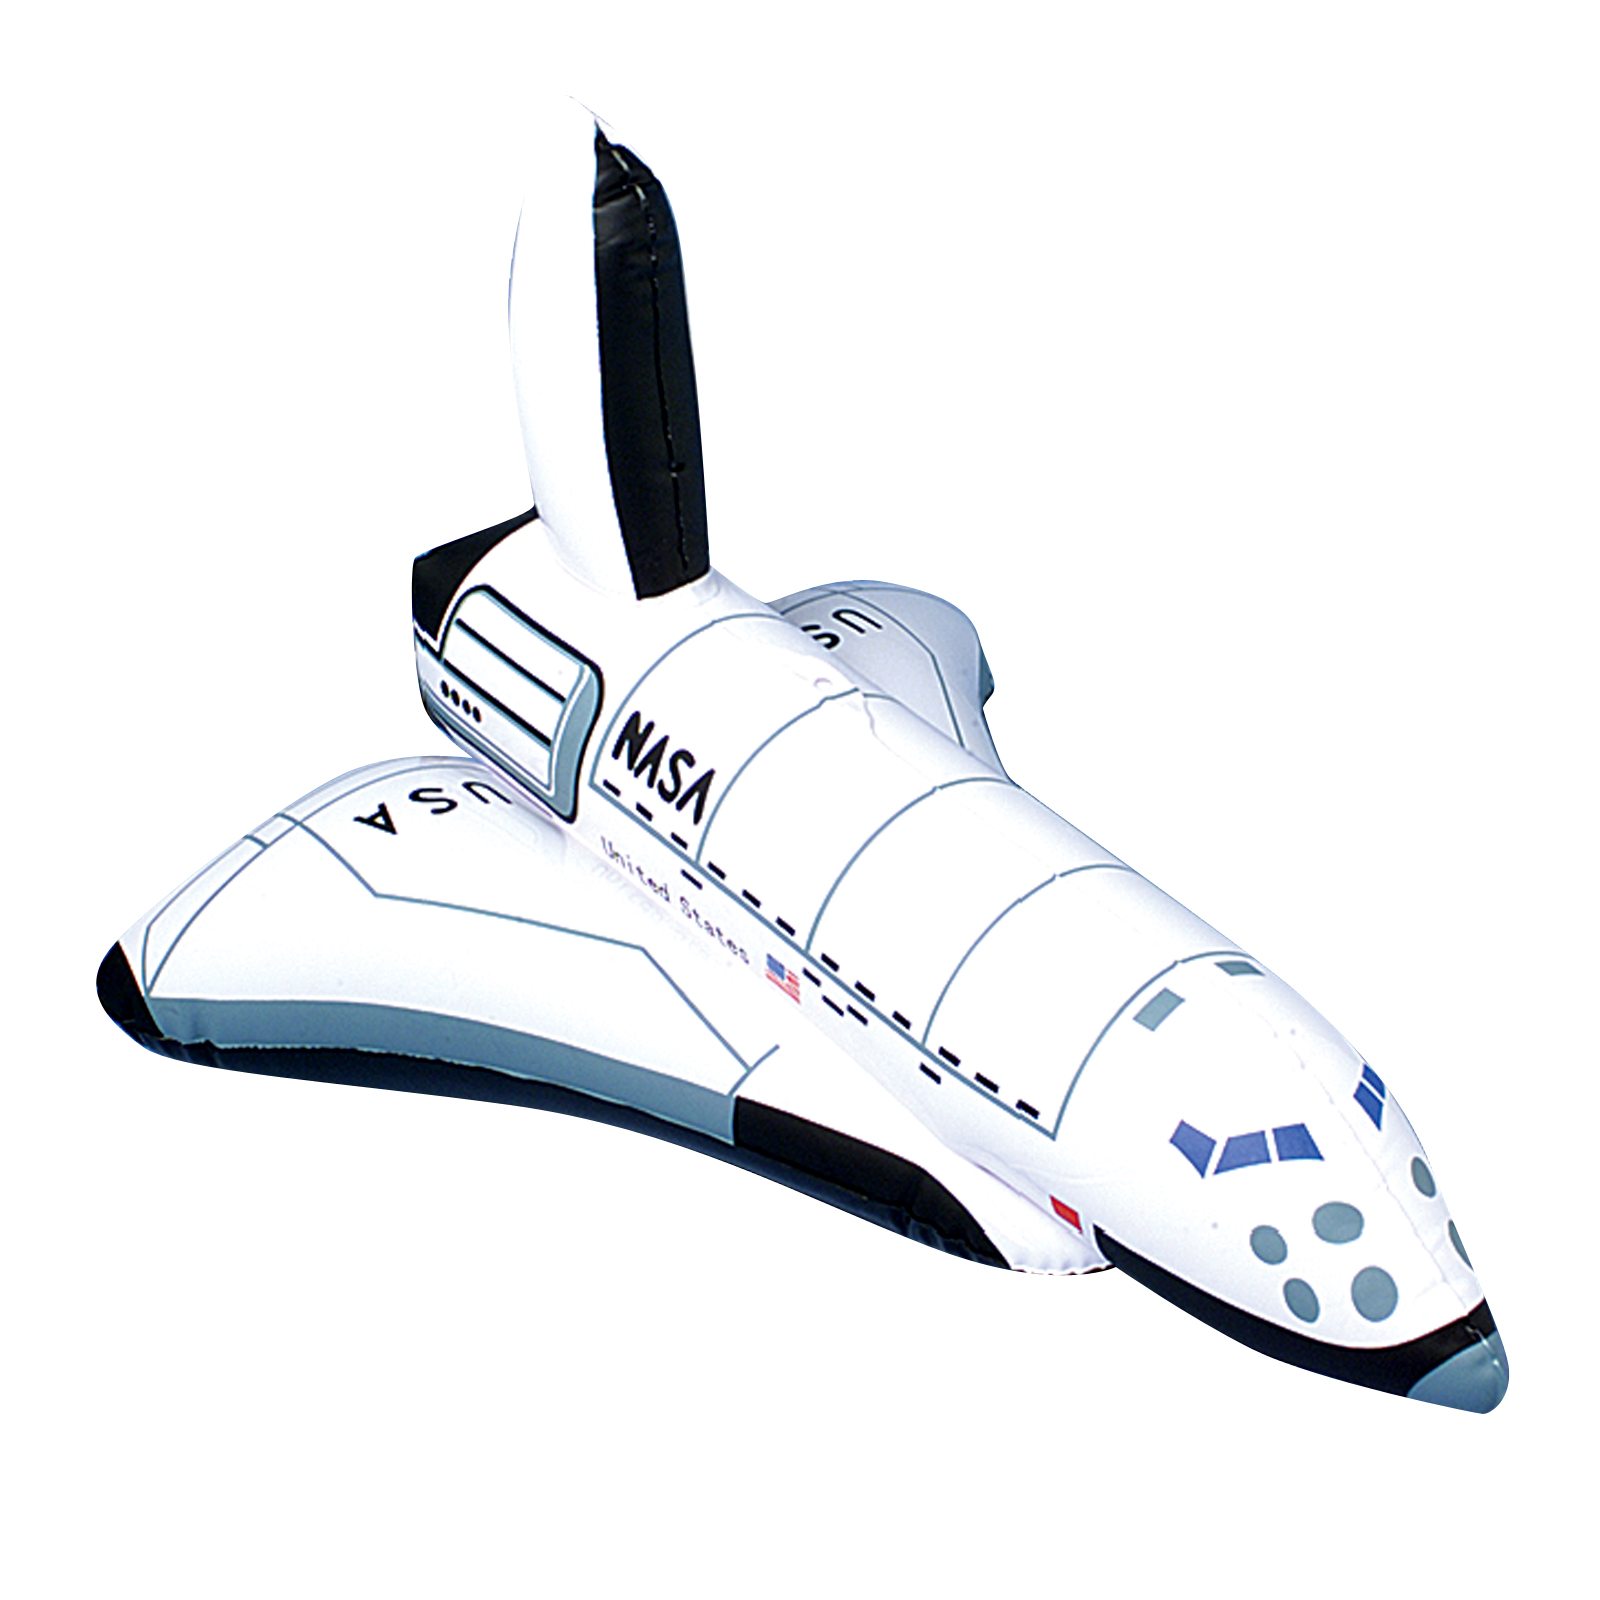 free clip art of space shuttle - photo #36